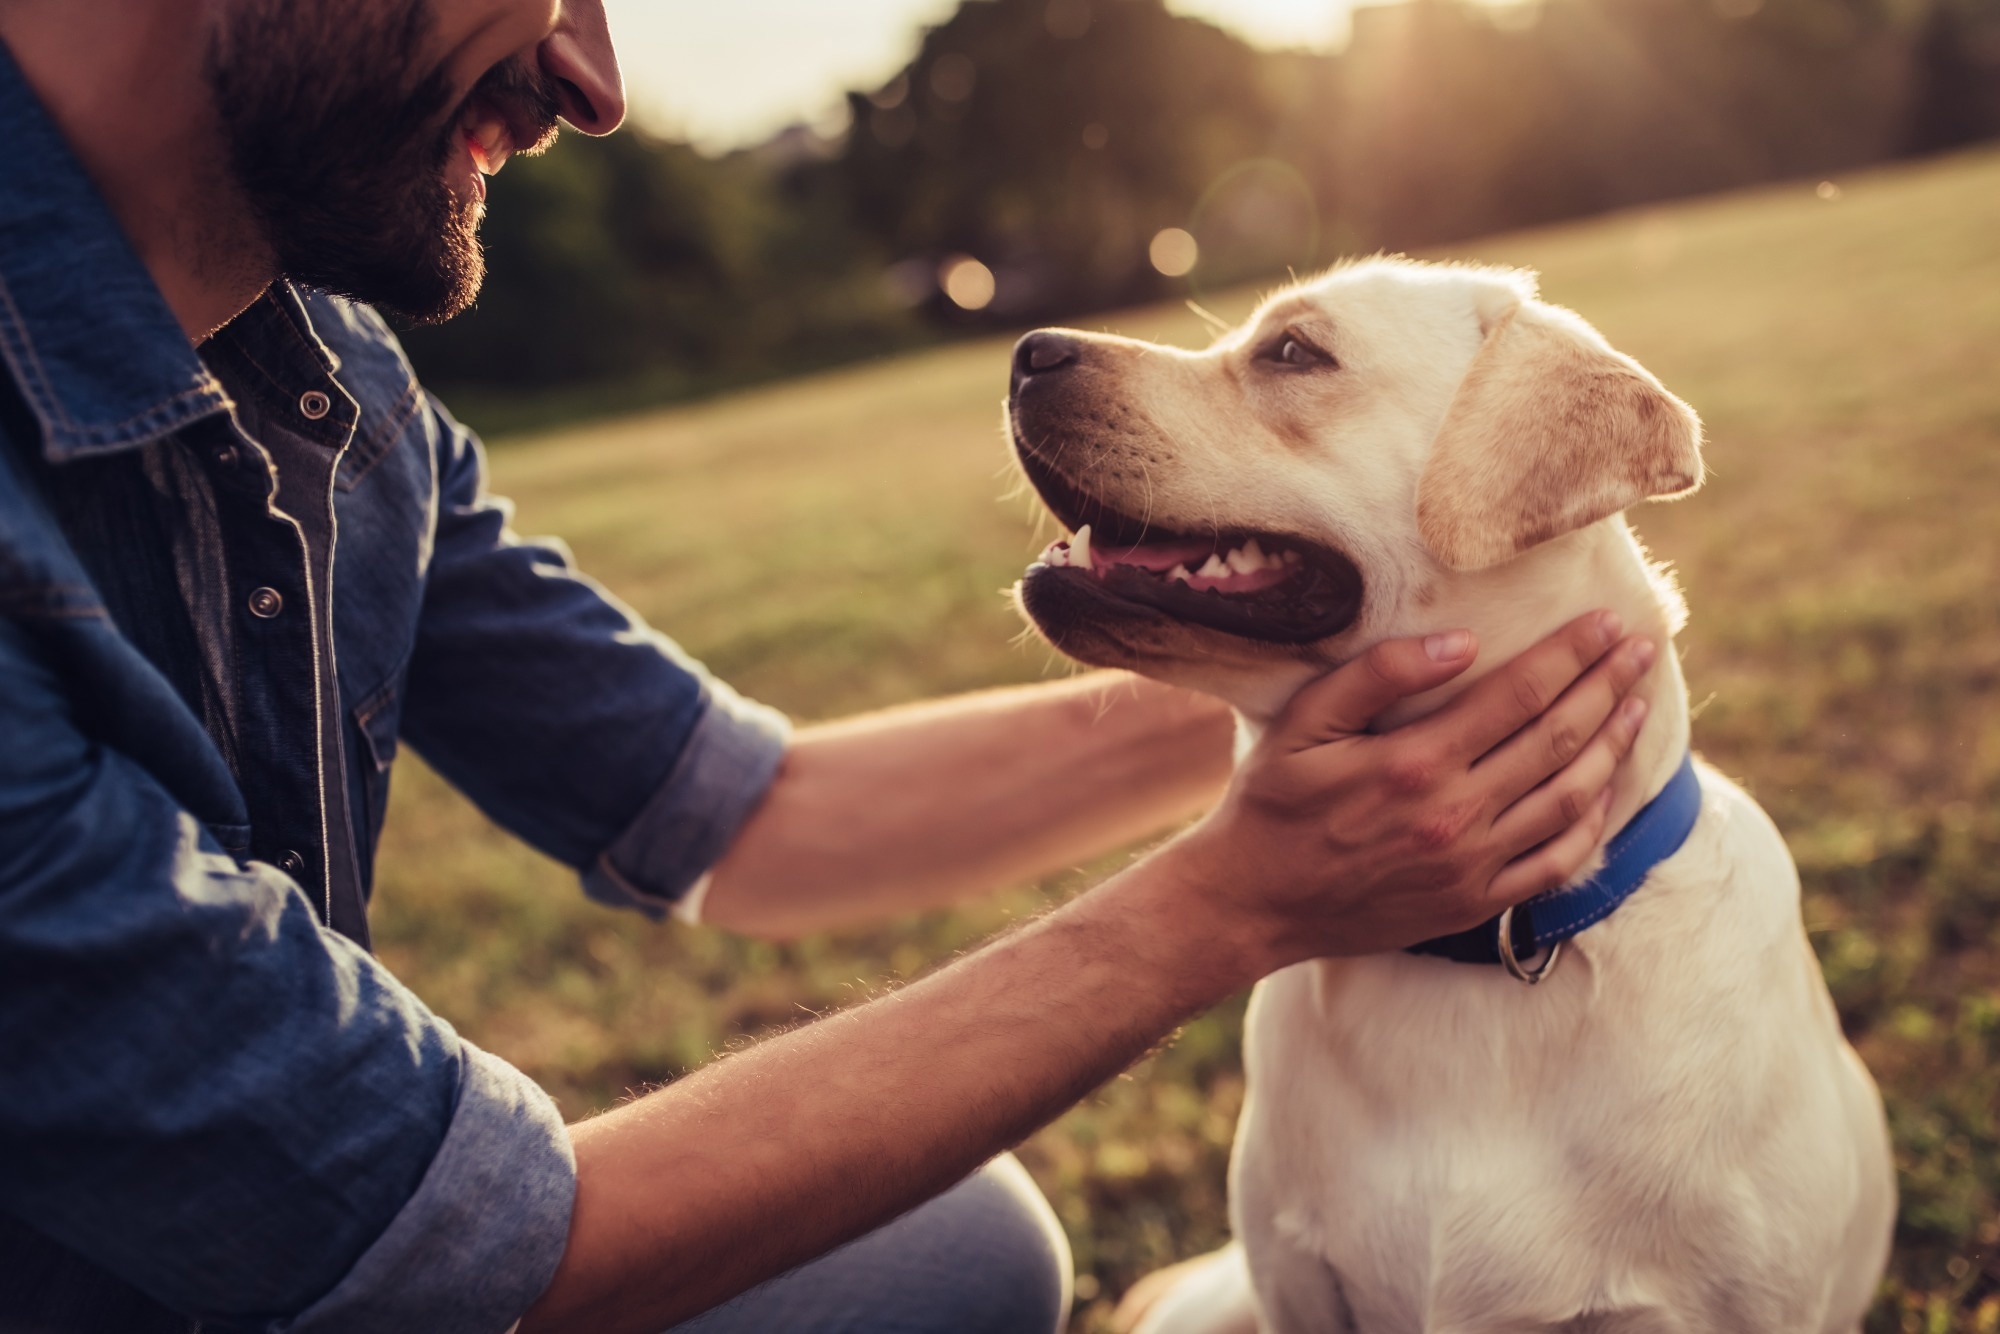 Study: Psychophysiological and emotional effects of human–Dog interactions by activity type: An electroencephalogram study. Image Credit: 4 PM production/Shutterstock.com